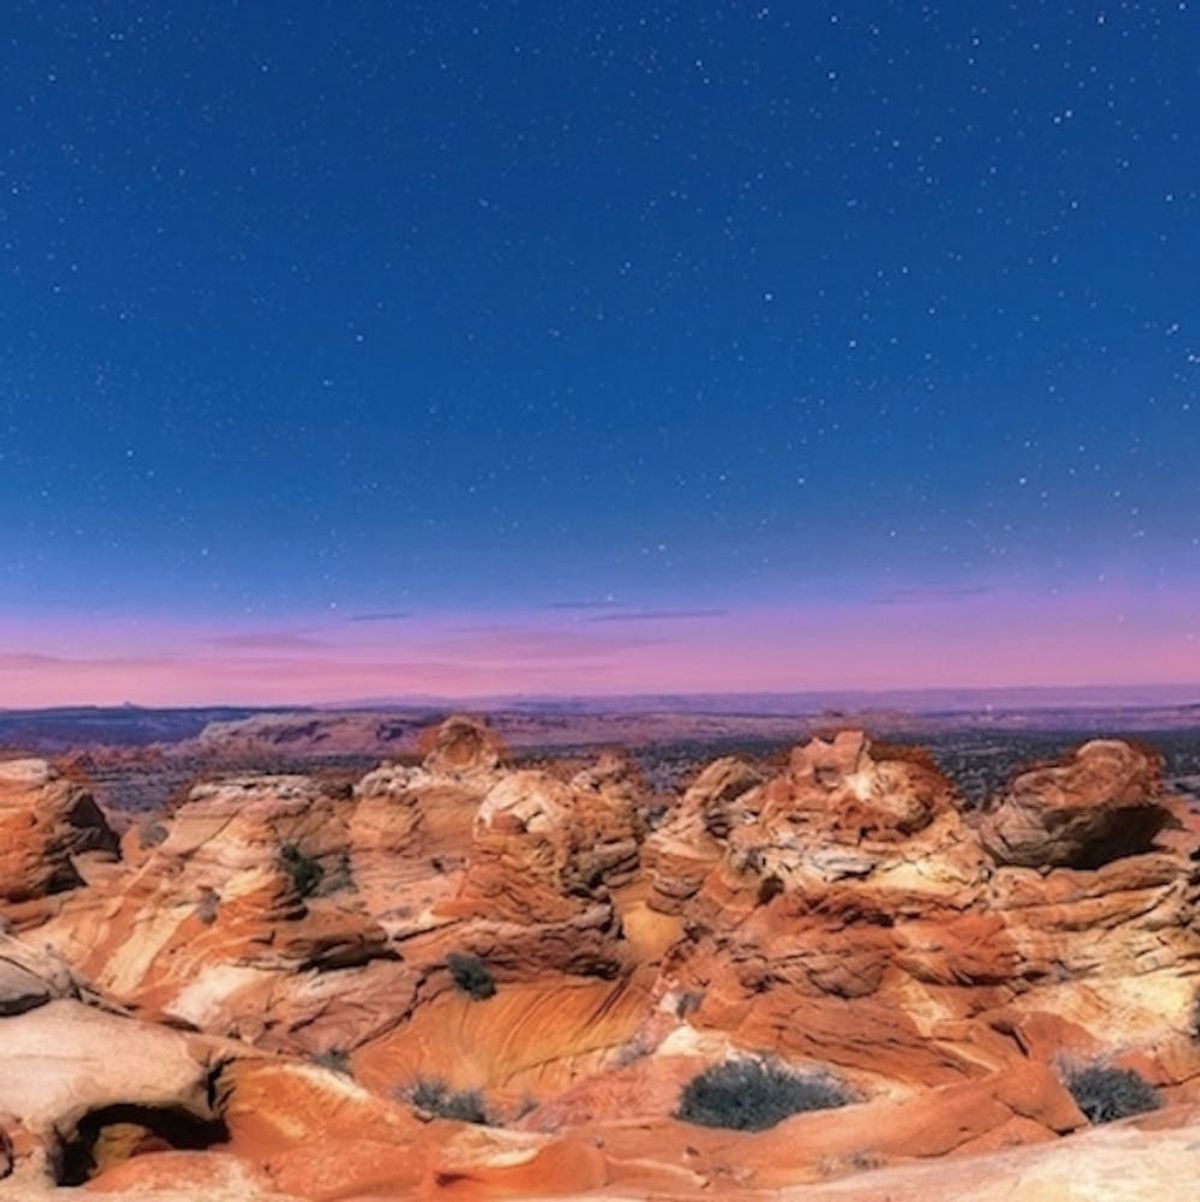 10 Travel Destinations That Look like Other Planets